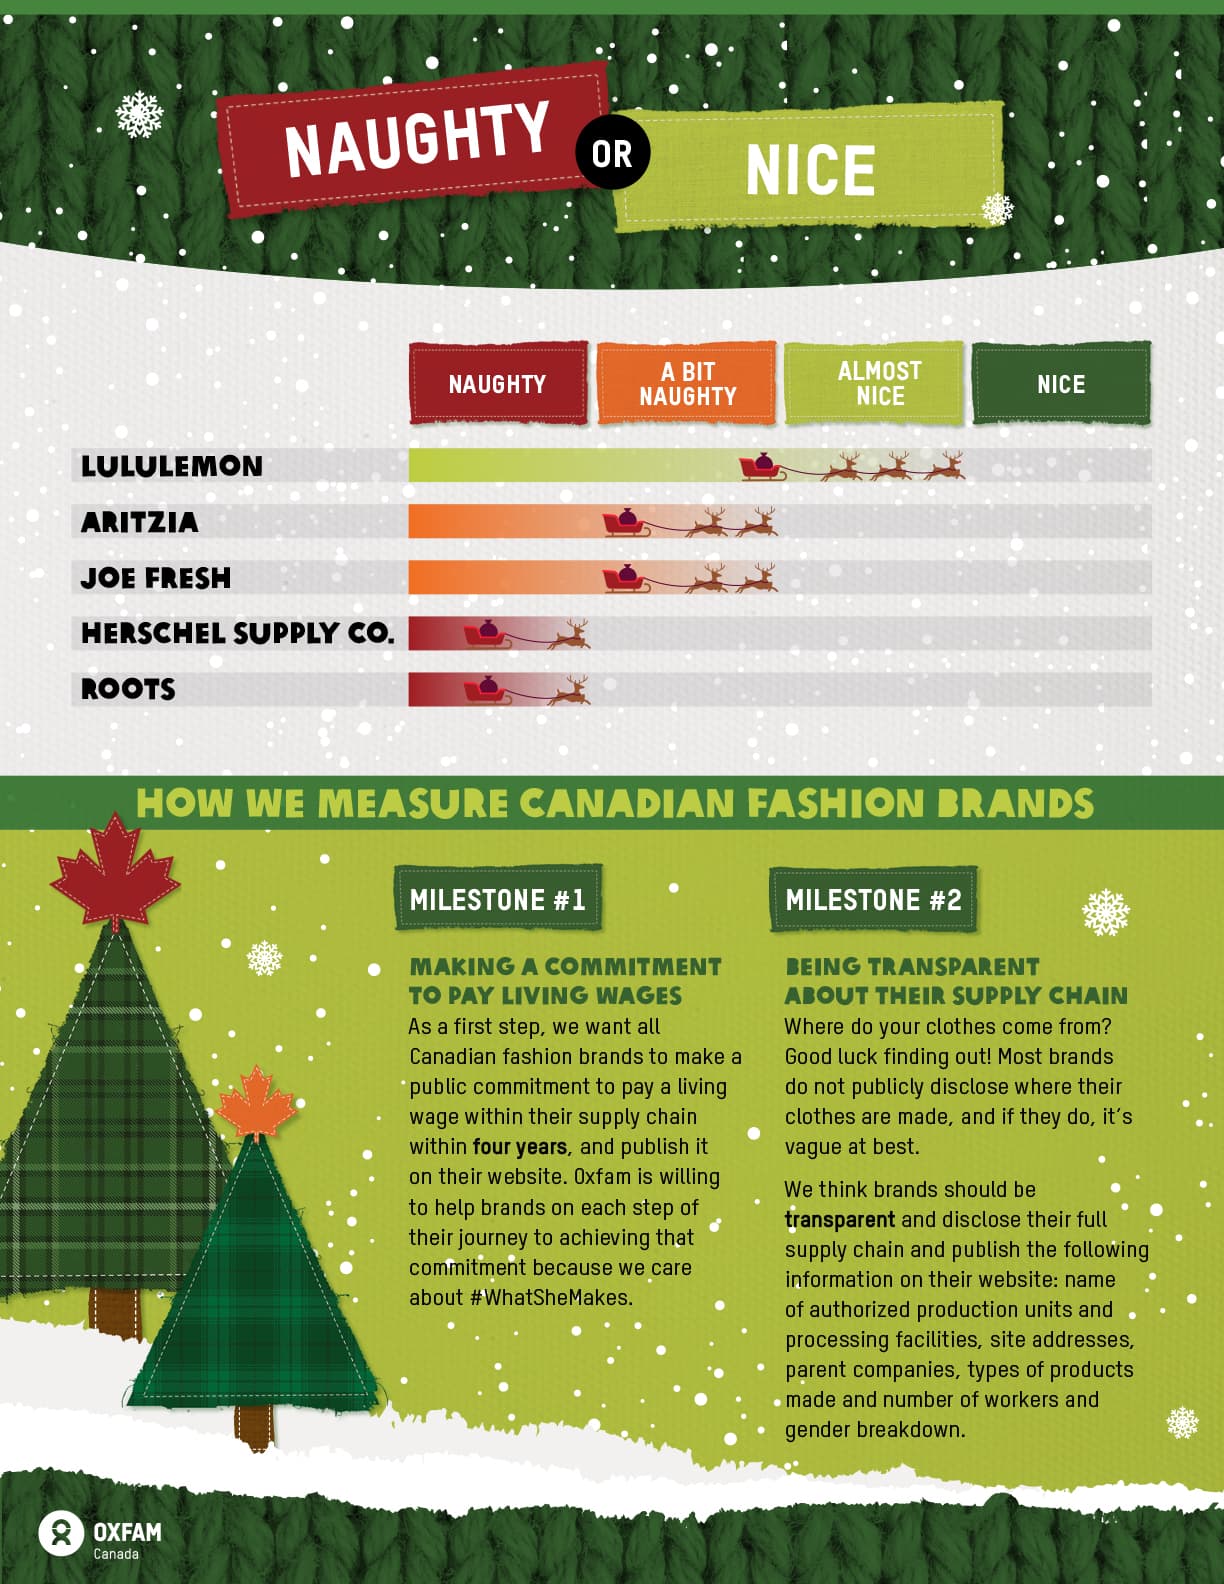 The infographic provides a ranking of Canadian fashion brands’ progress in providing living wages to garment workers. The title reads Naughty or Nice 2022. Below this, is a stacked chart listing the Canadian fashion brands targeted by Oxfam Canada. The 4 rankings are as follows : Naughty, A Bit Naughty, Almost Nice and Nice. The 5 brands listed are as follows : Lululemon, Aritzia, Joe Fresh, Herschel Supply Co. and Roots. The rankings are as follows : Almost Nice, Lululemon A Bit Naughty, Aritzia and Joe Fresh Naughty, Herschel Supply Co. and Roots Below the stacked chart is a title that reads : How we measure Canadian fashion brands. Below this are two paragraphs explaining the two milestones used to measure the progress of Canadian fashion brands. The first milestone is ‘Making a commitment to pay living wages’. The second milestone is ‘Being transparent about their supply chain’. On the left hand side of the footer is the Oxfam Canada logo along with the What She Makes campaign logo. On the right hand side of the footer is the URL to the campaign website.